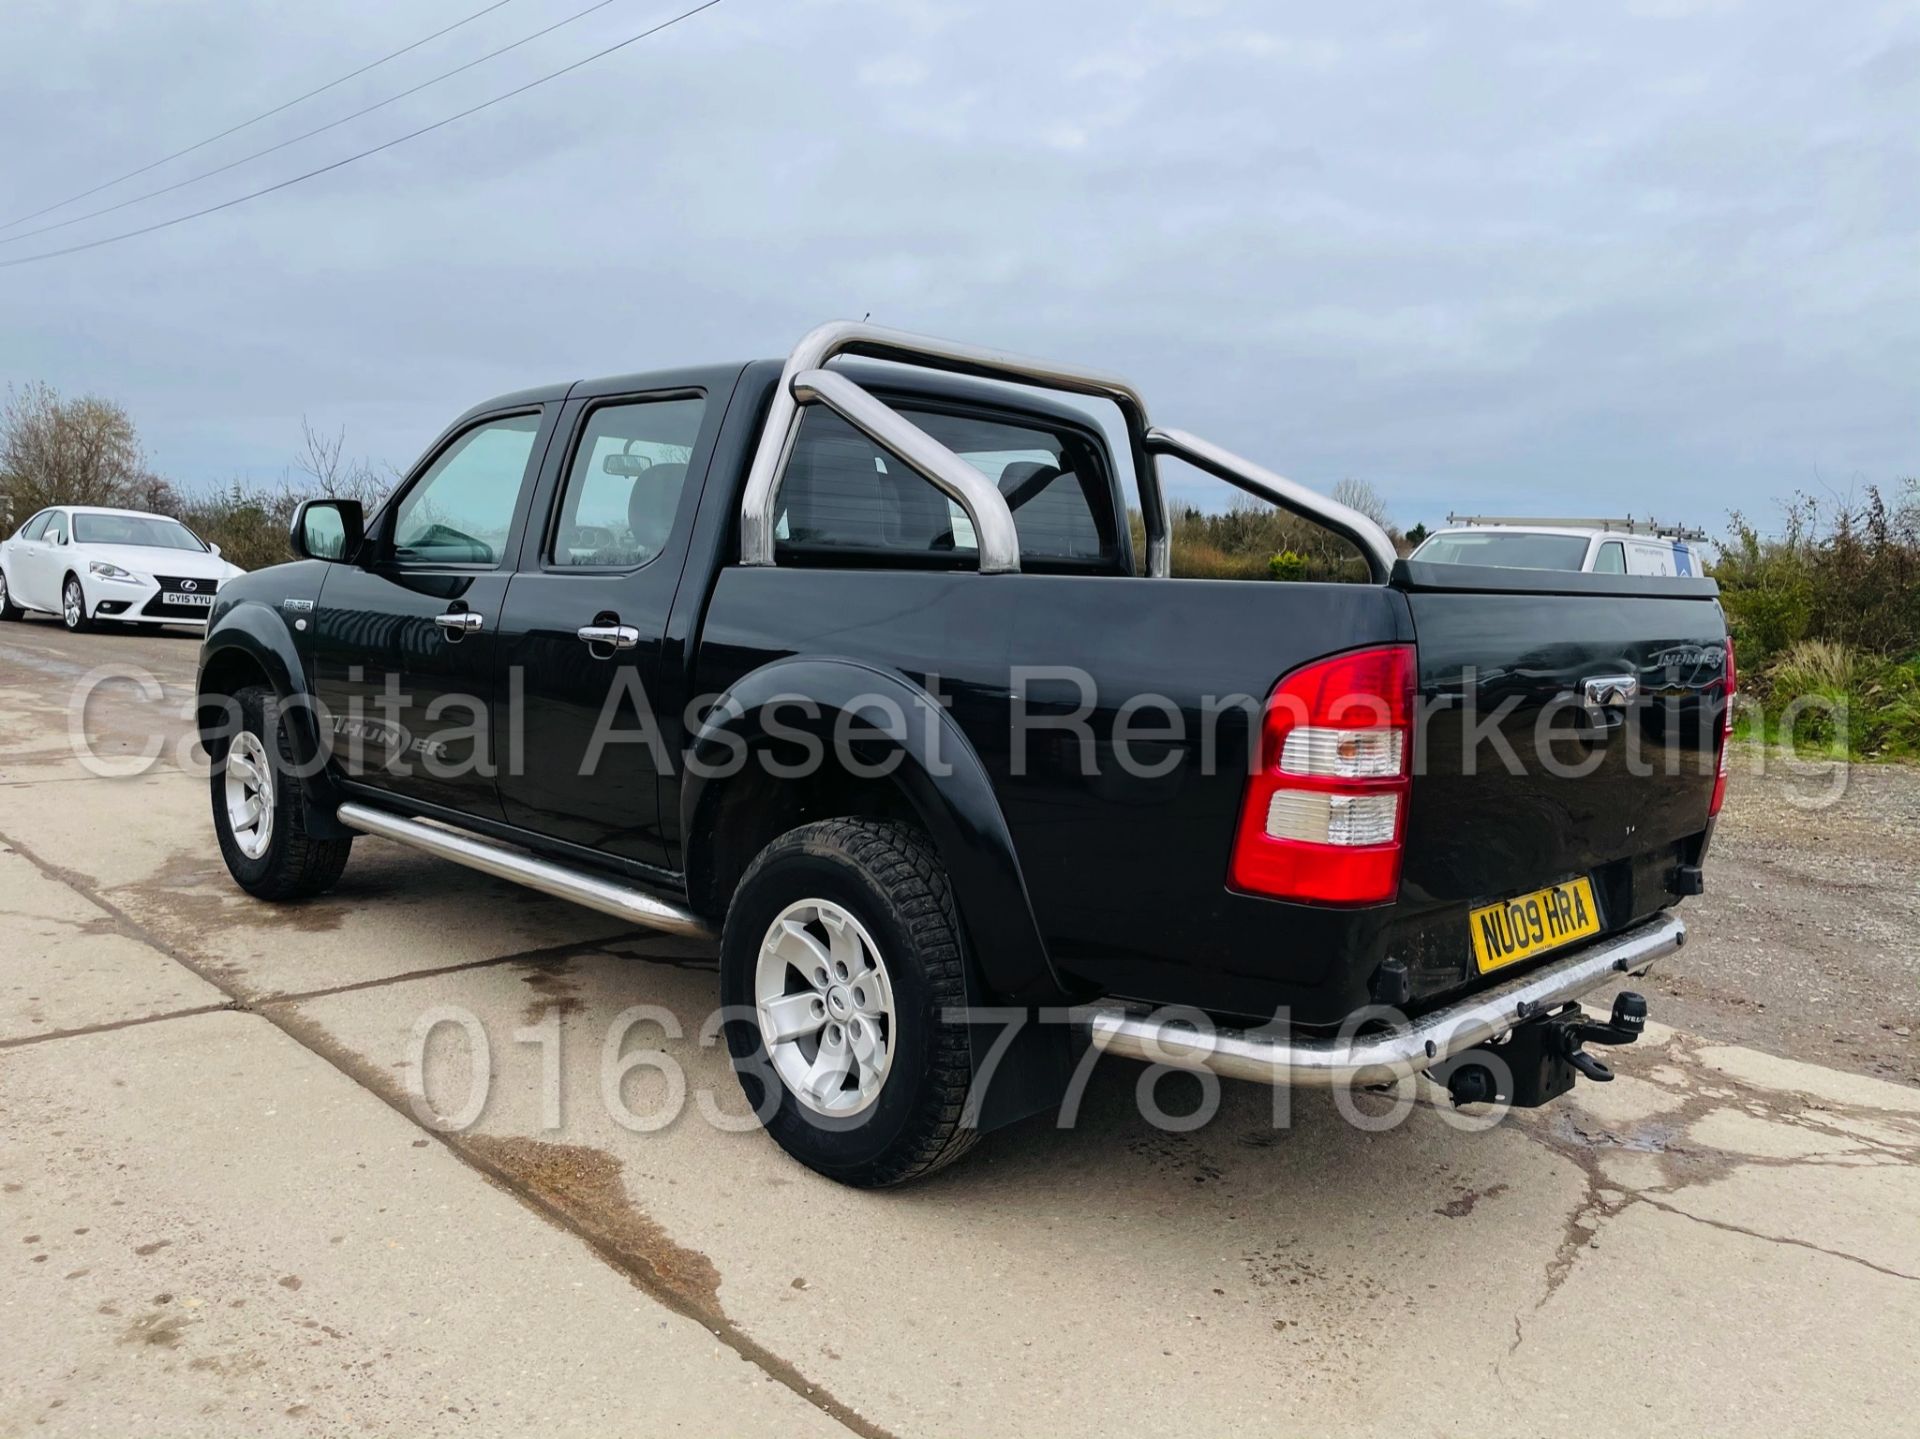 ON SALE FORD RANGER *THUNDER* DOUBLE CAB 4X4 PICK-UP (2009) '2.5 TDCI - 1 *LEATHER - A/C* (NO VAT) - Image 9 of 40